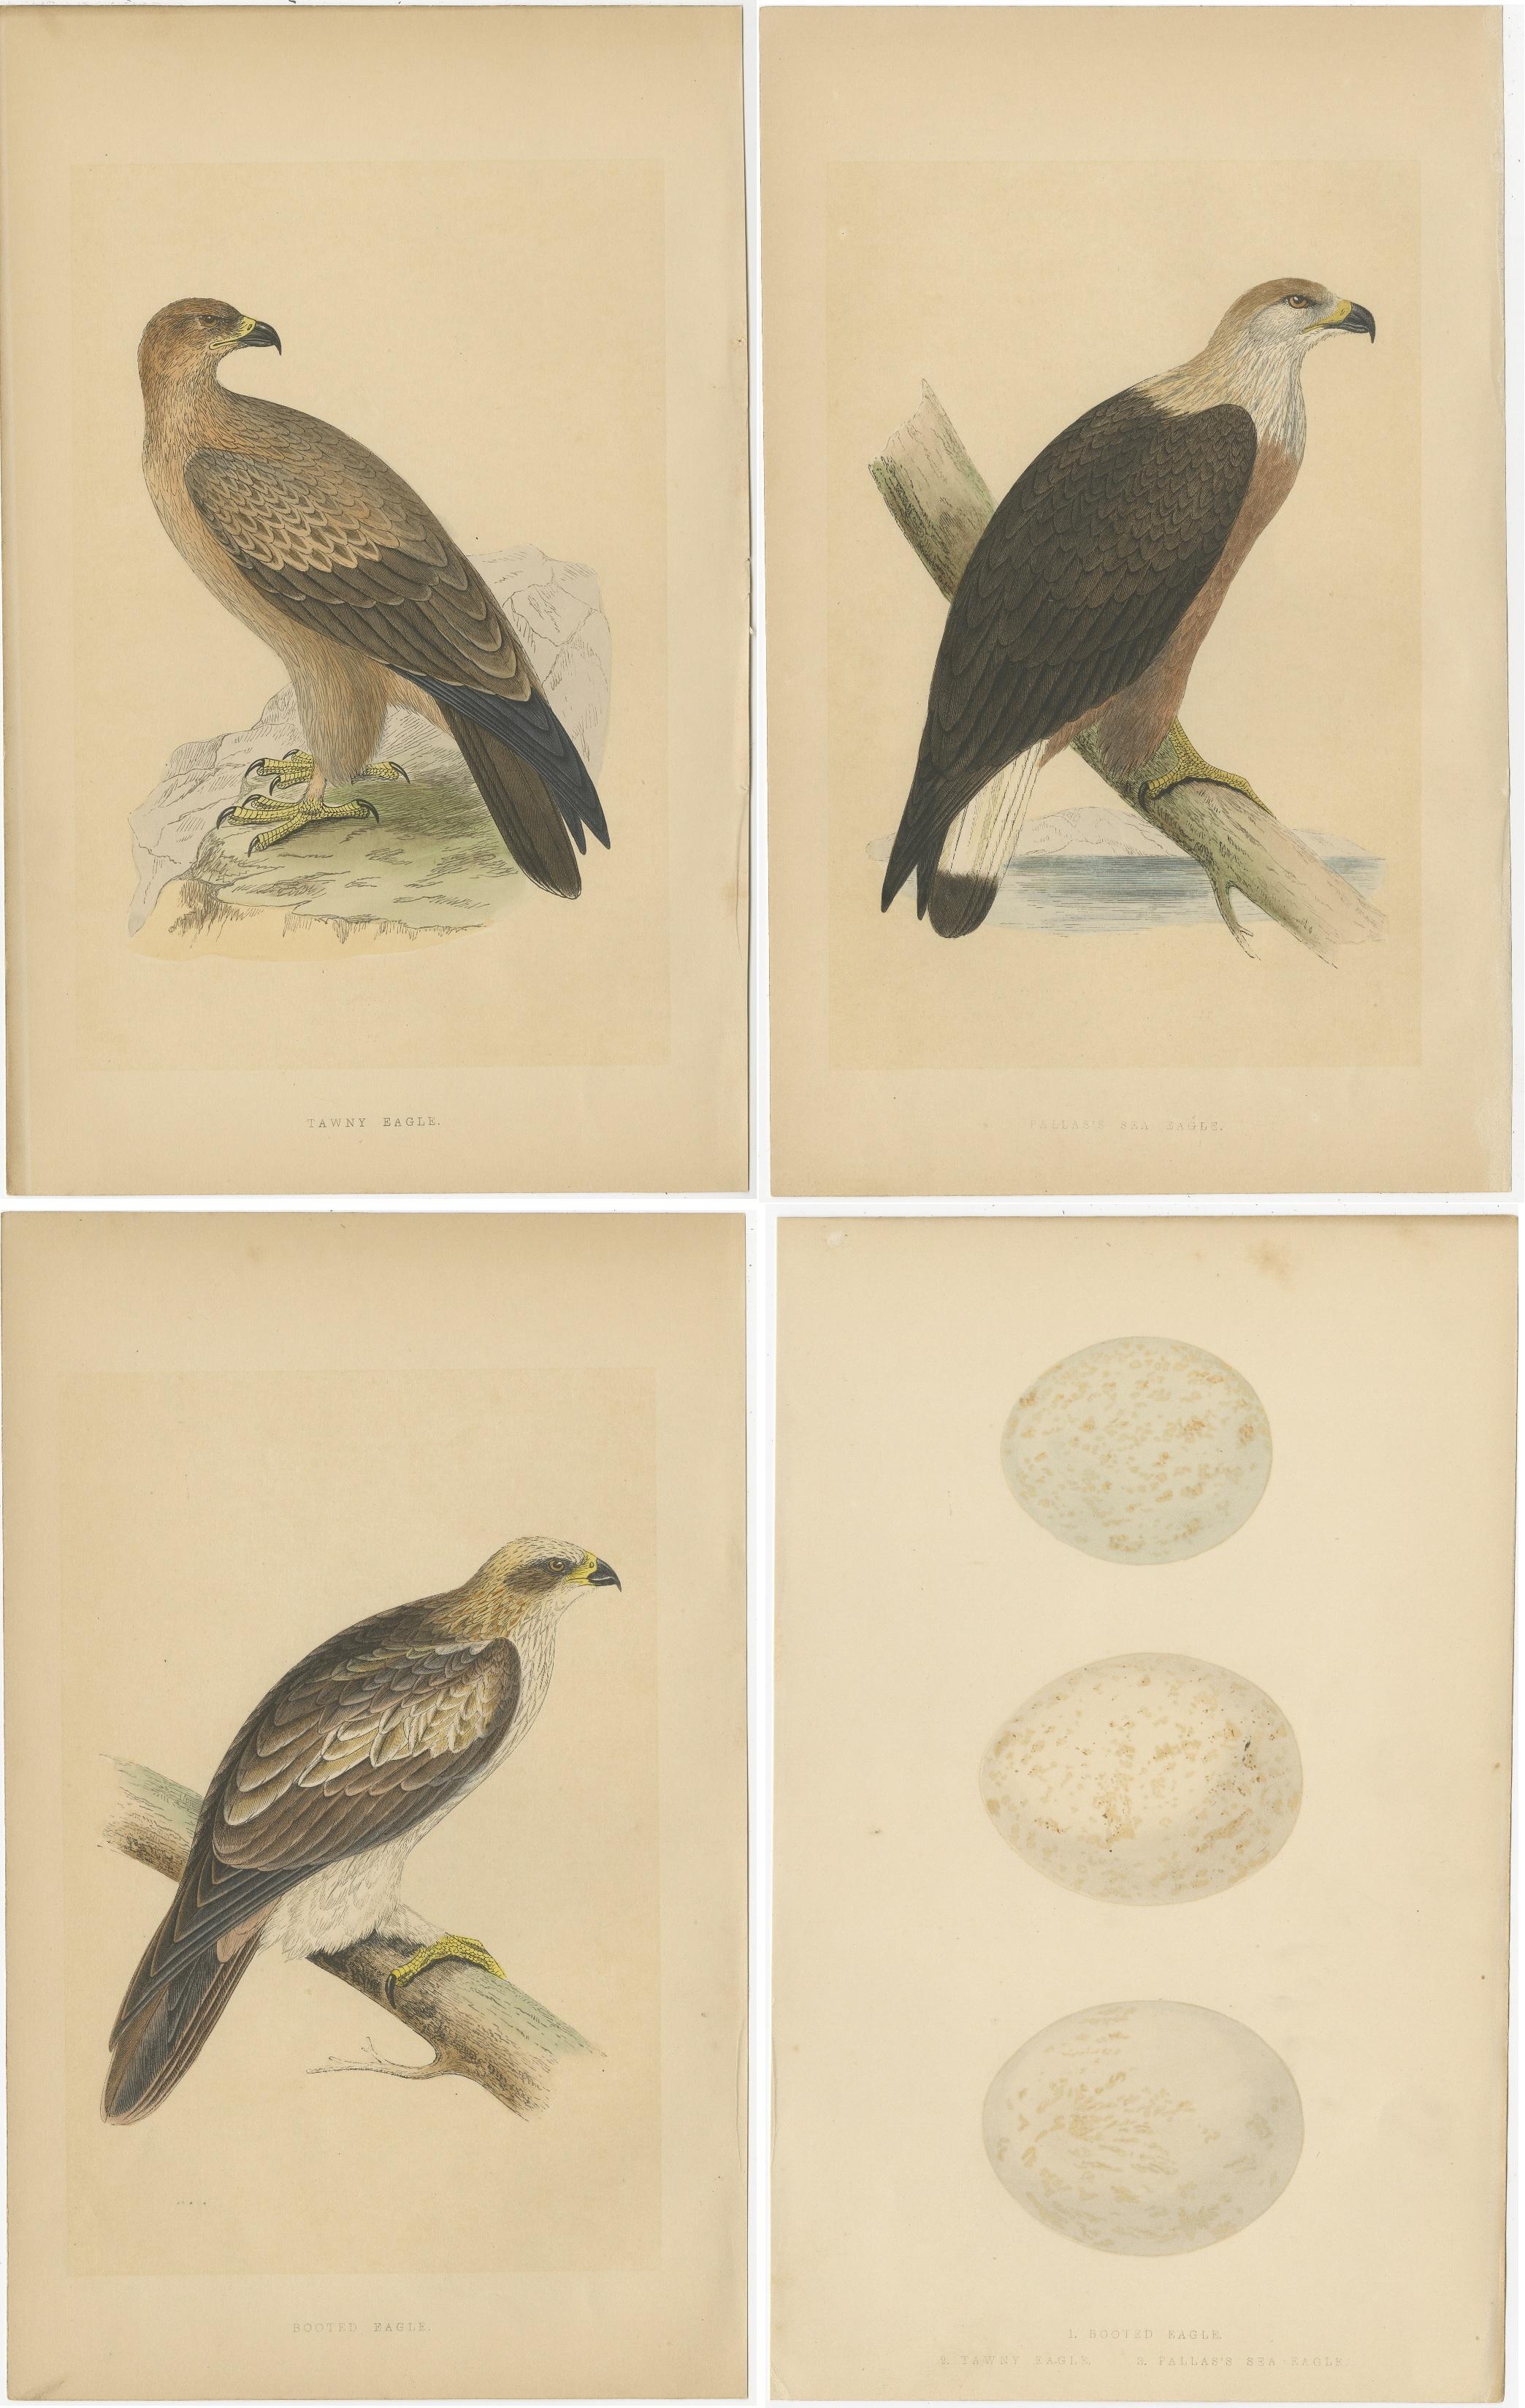 These four antique bird prints are part of a set depicting a tawny eagle, Pallas's sea eagle, booted eagle, and their eggs. They originate from the book titled 'A history of the birds of Europe, not observed in the British Isles,' authored by